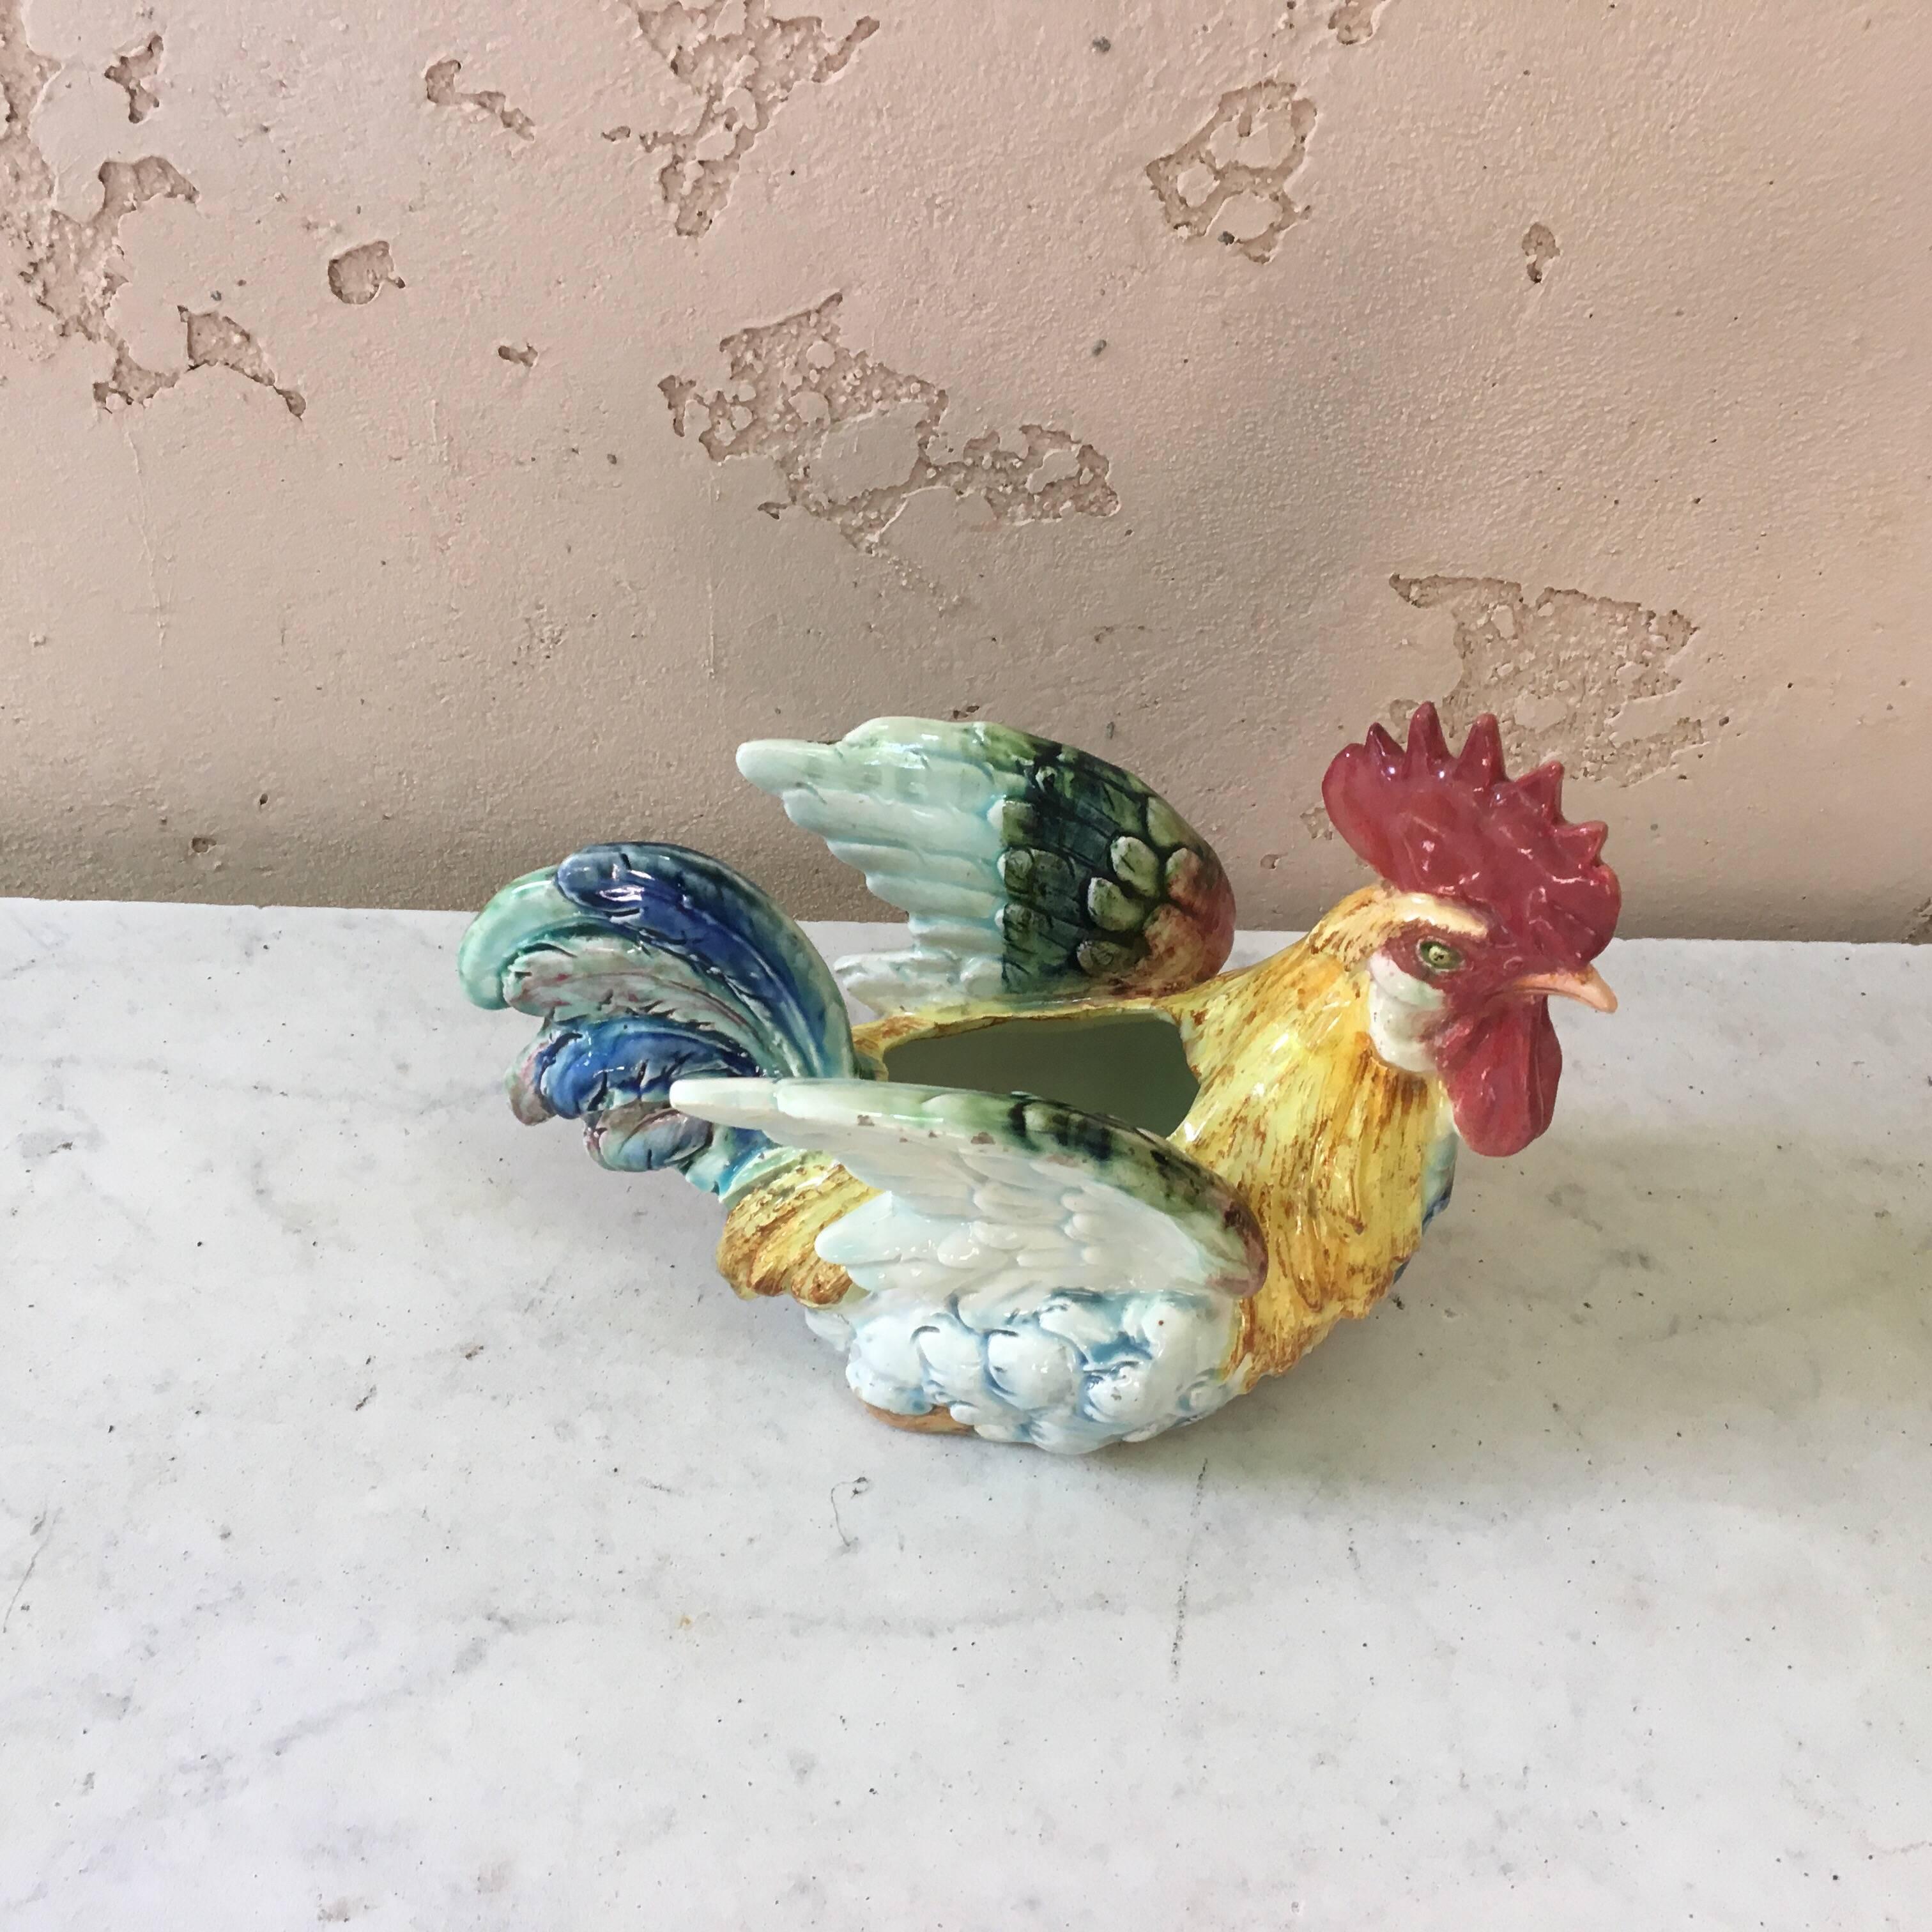 A rare Majolica rooster jardinière signed Delphin Massier, circa 1890.
Country, Rustic style.
Beautiful range of colors.
Reference / A similar example of this piece page 93 